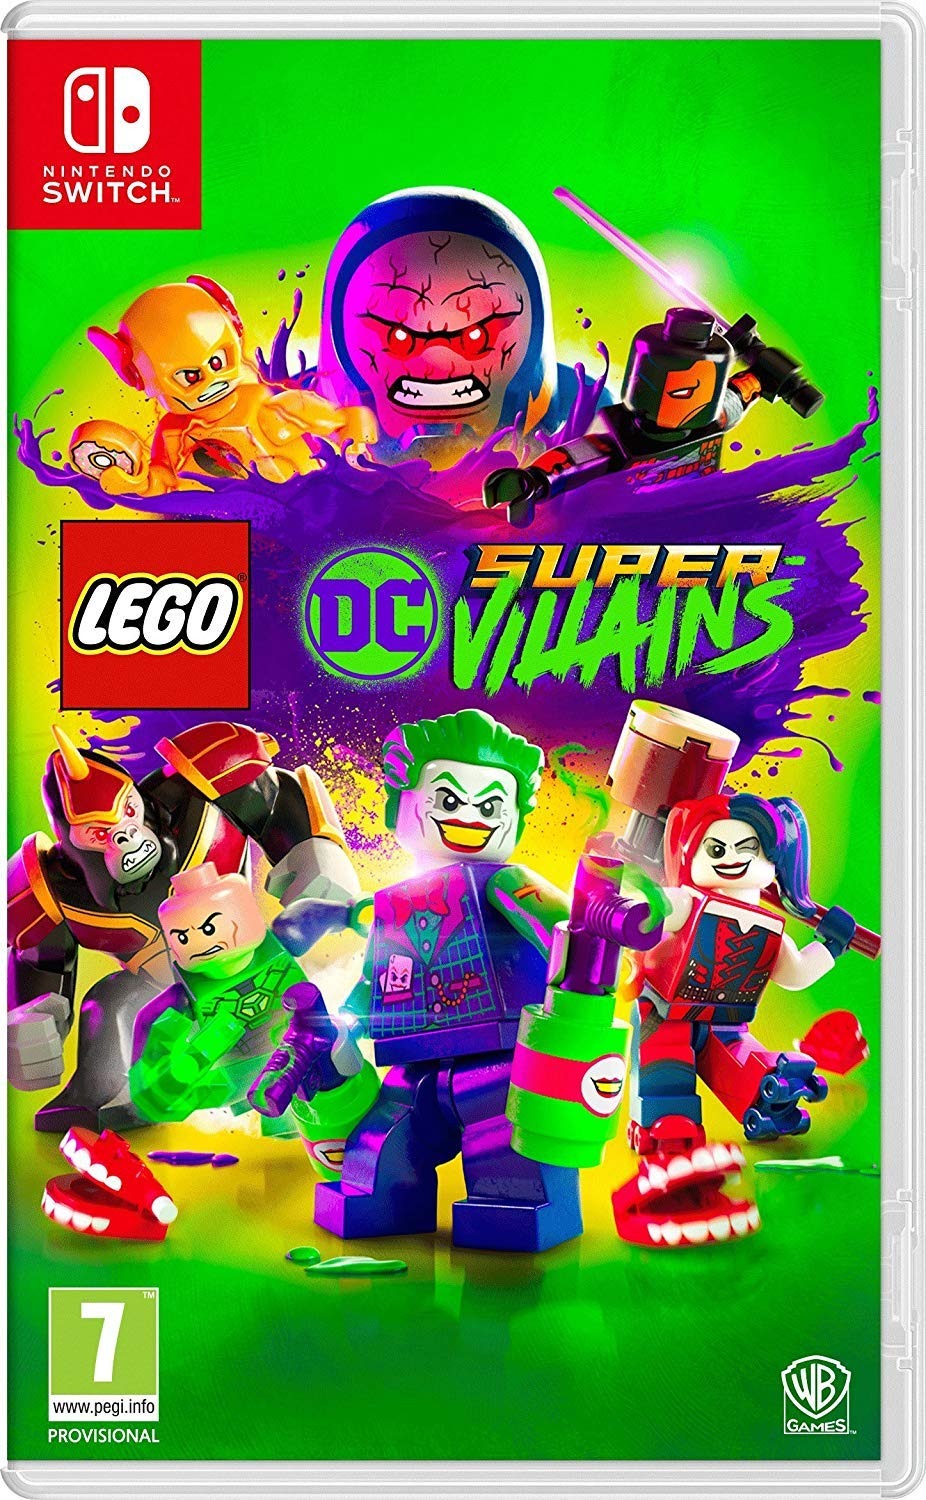 YMMV In-store LEGO DC Supervillains - Nintendo Switch $5